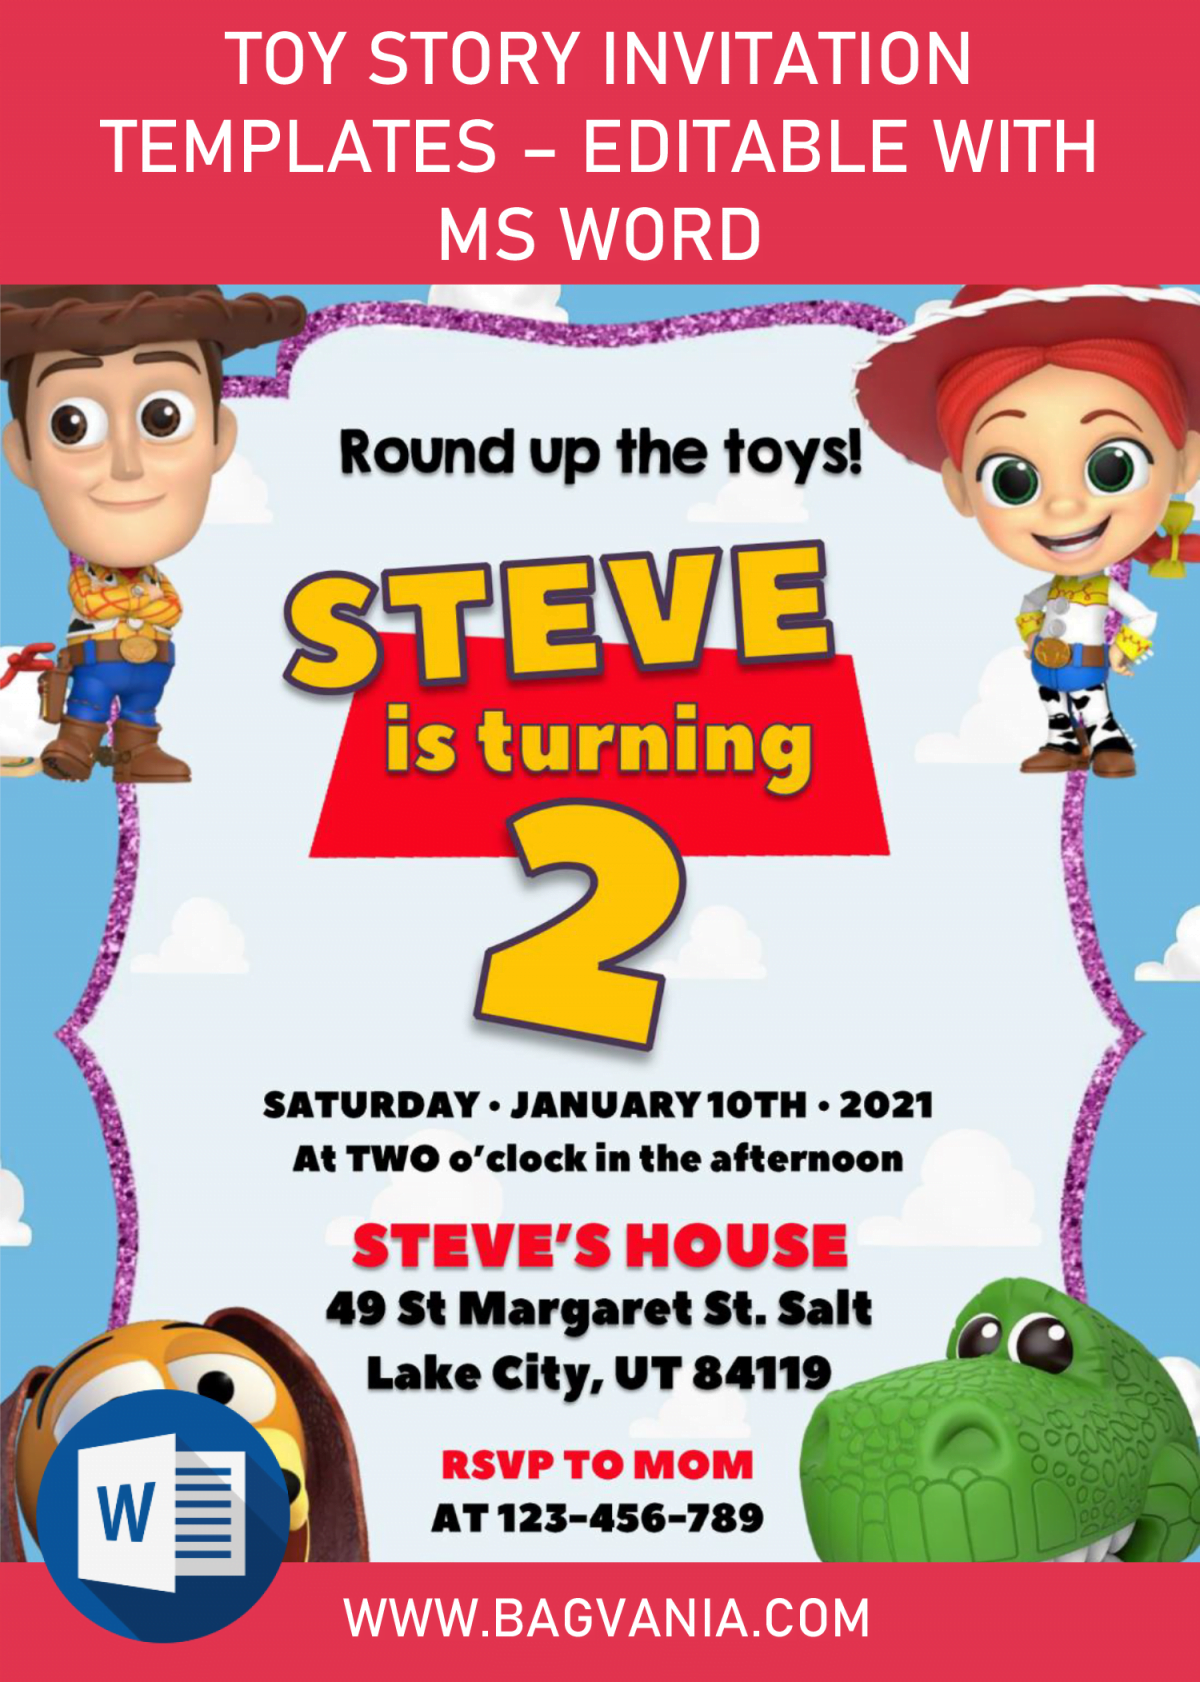 Toy Story Invitation Templates - Editable With MS Word